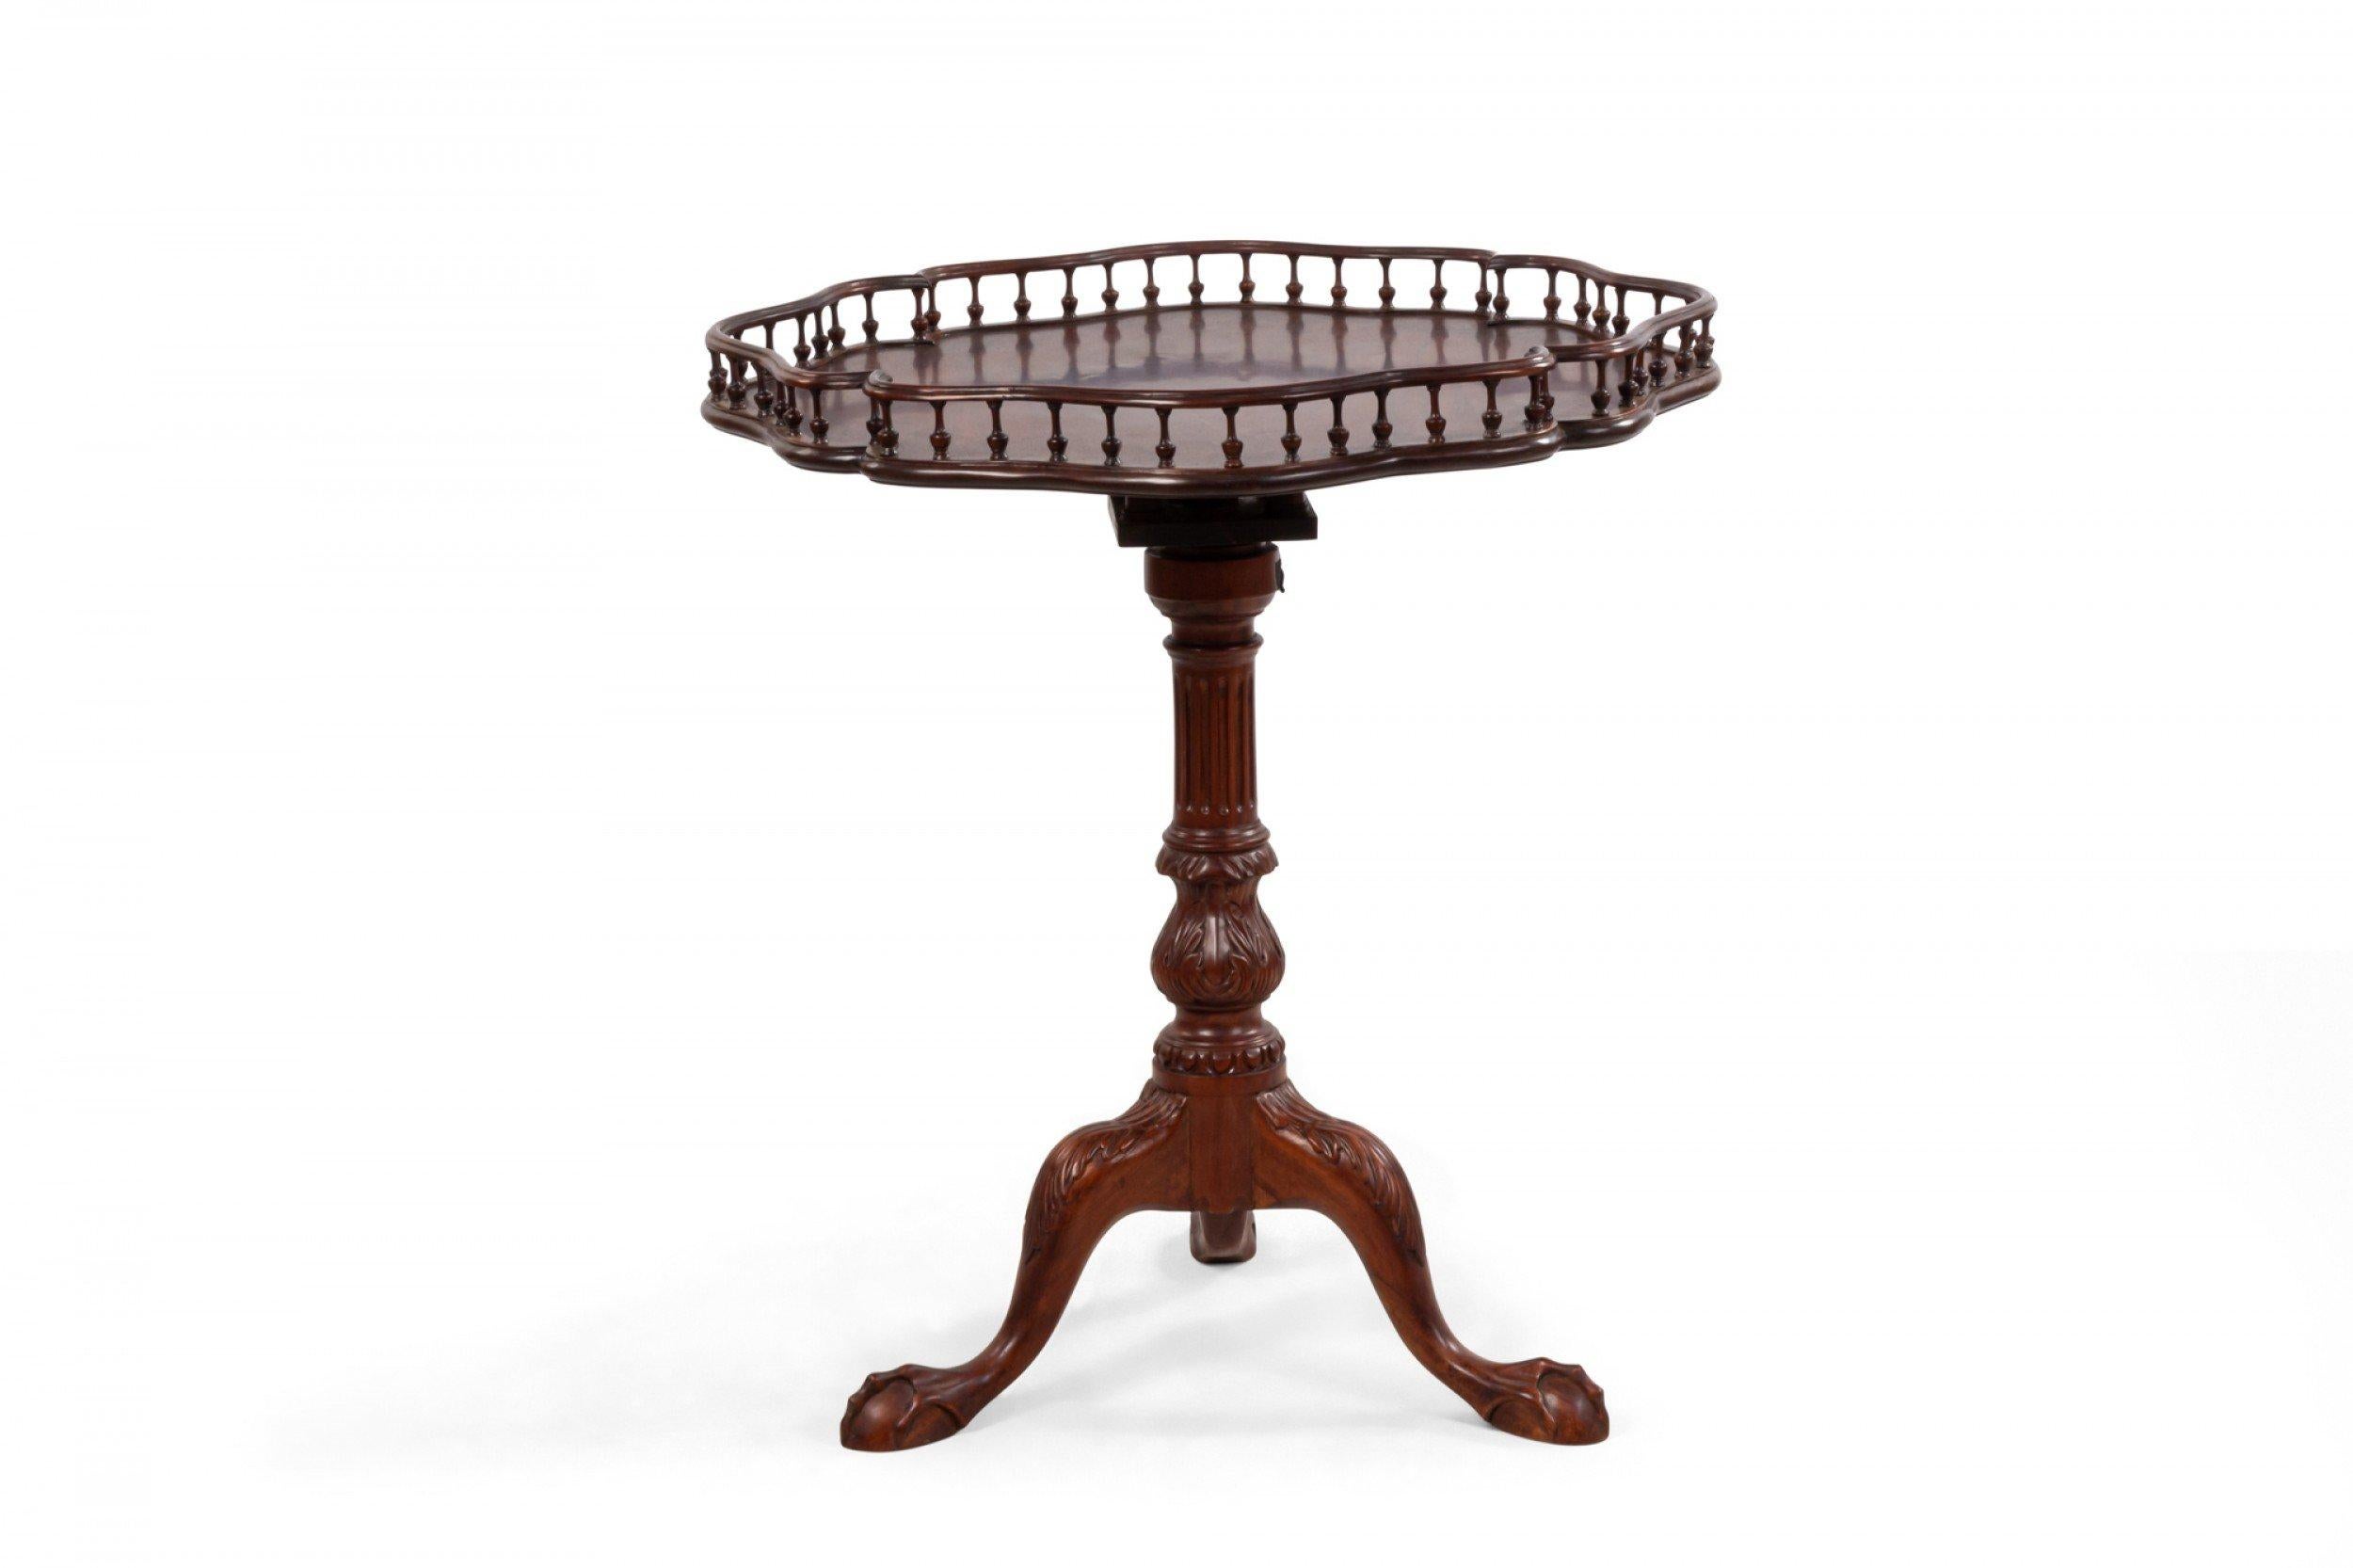 Pair of 20th century English Georgian style similar tilt-top mahogany side/end tables with clover-shaped tops with galleries and pedestal bases (height varies slightly).